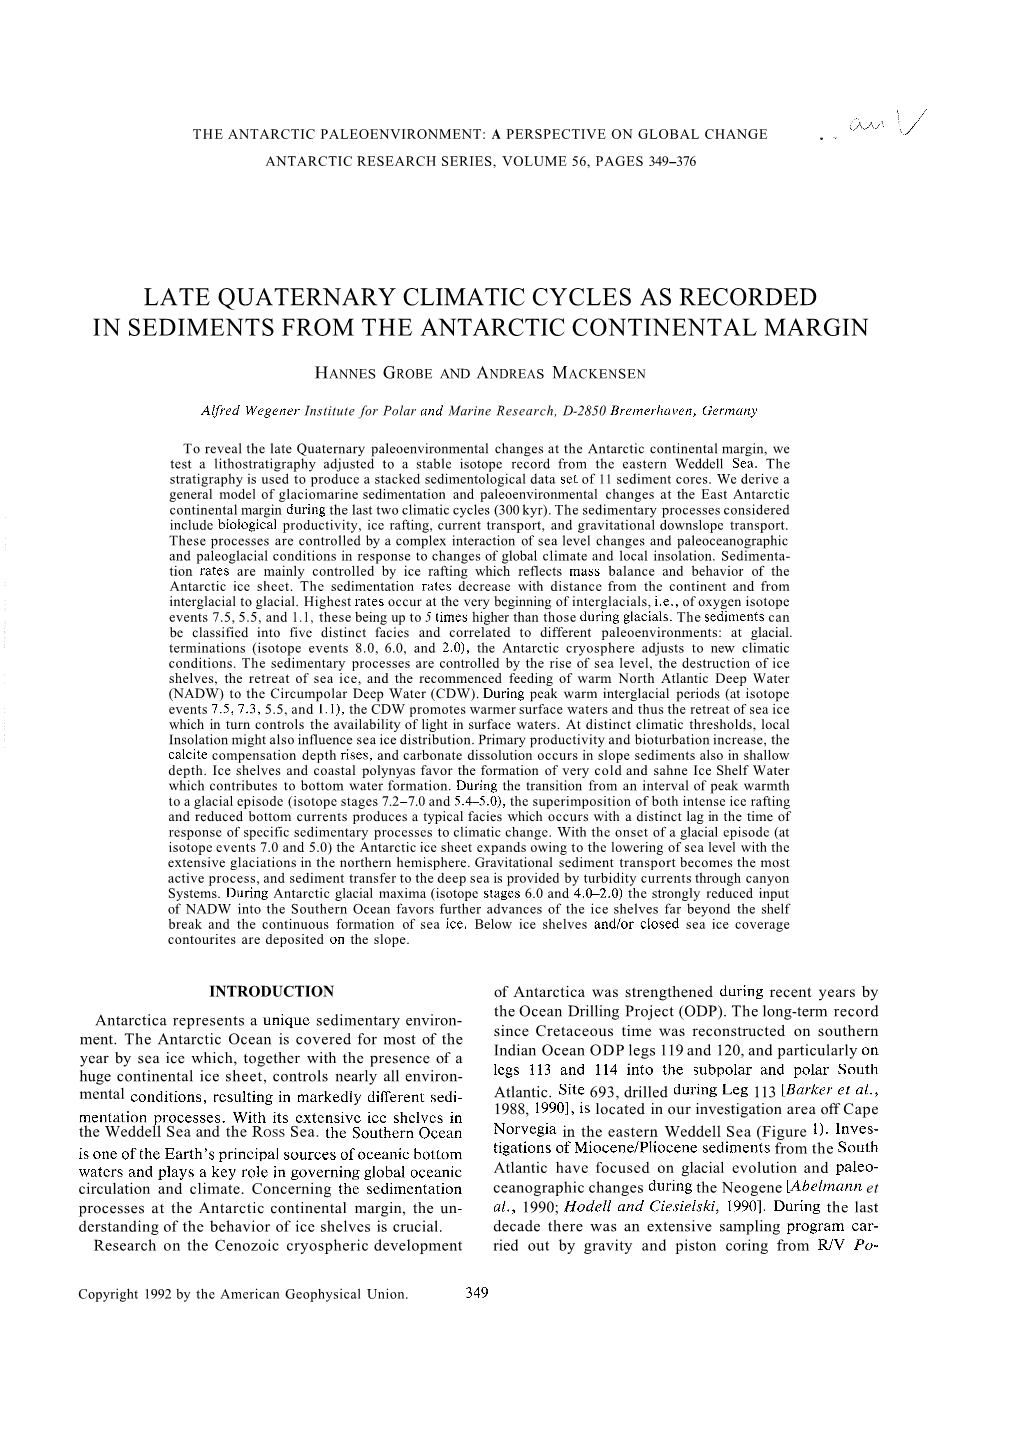 Late Quaternary Climatic Cycles As Recorded in Sediments from the Antarctic Continental Margin